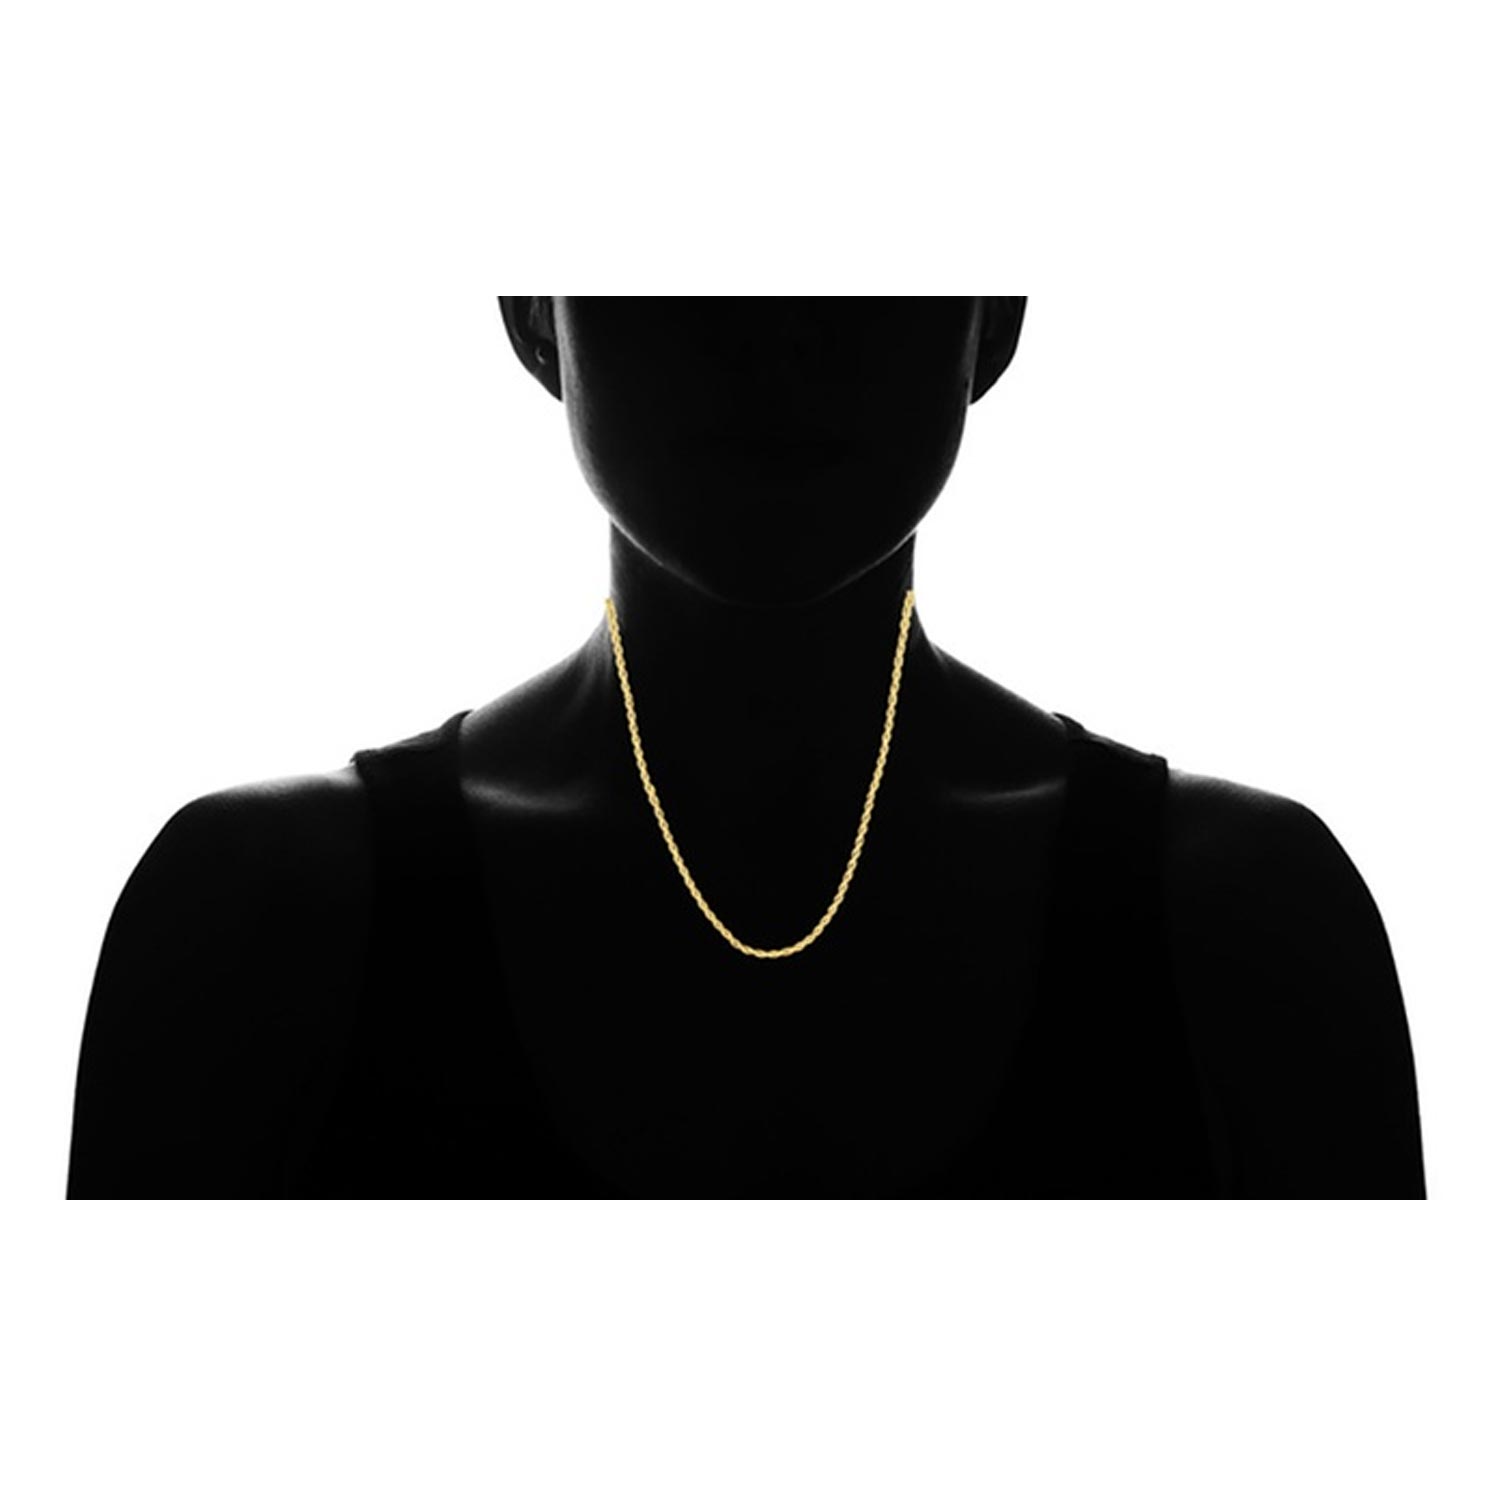 14K Gold 3mm Diamond Cut Rope Chain Necklace